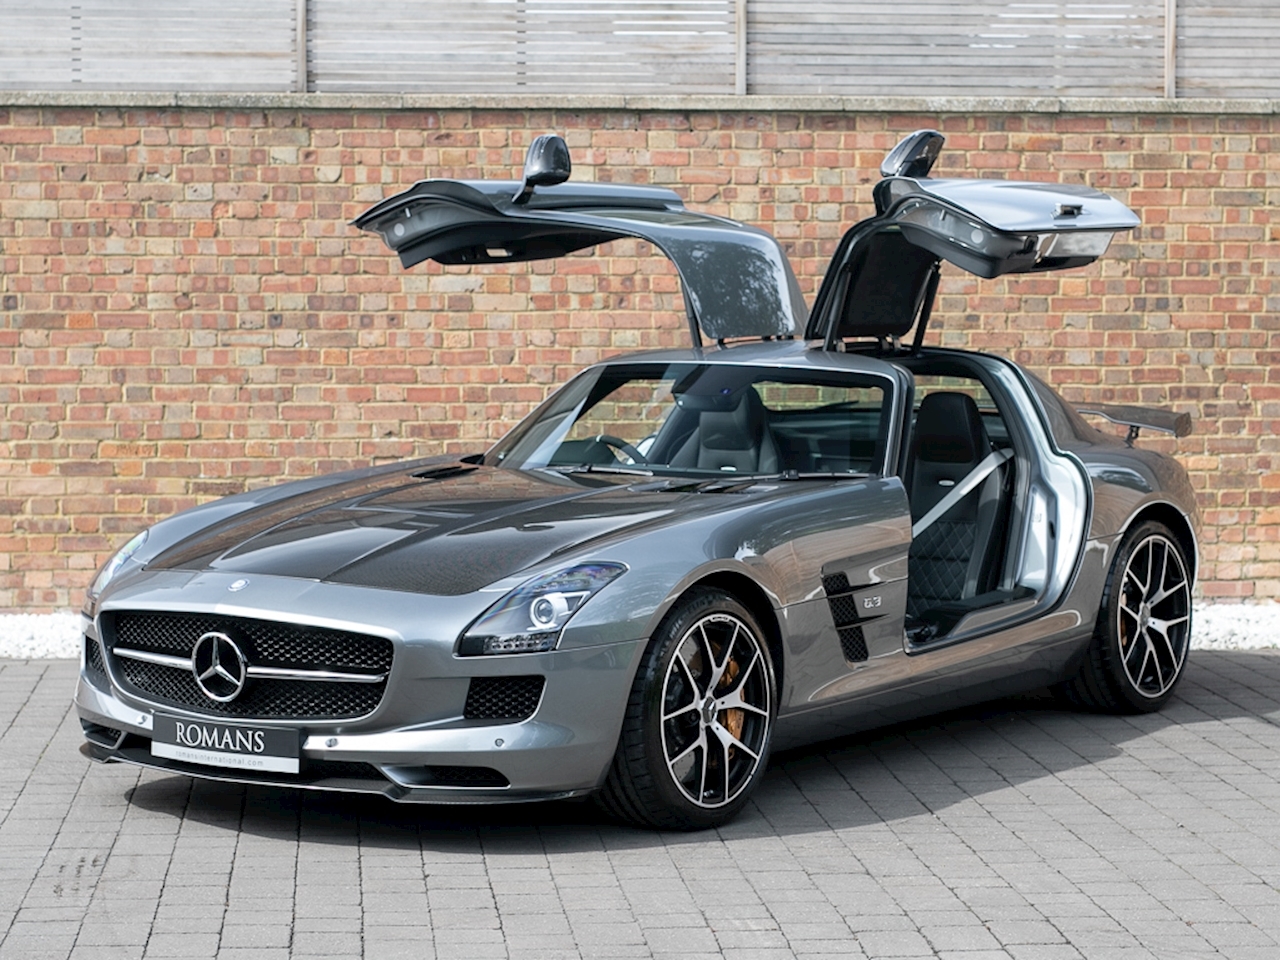 The Mercedes Benz SLS AMG GT Final Edition with the iconic gullwing doors open